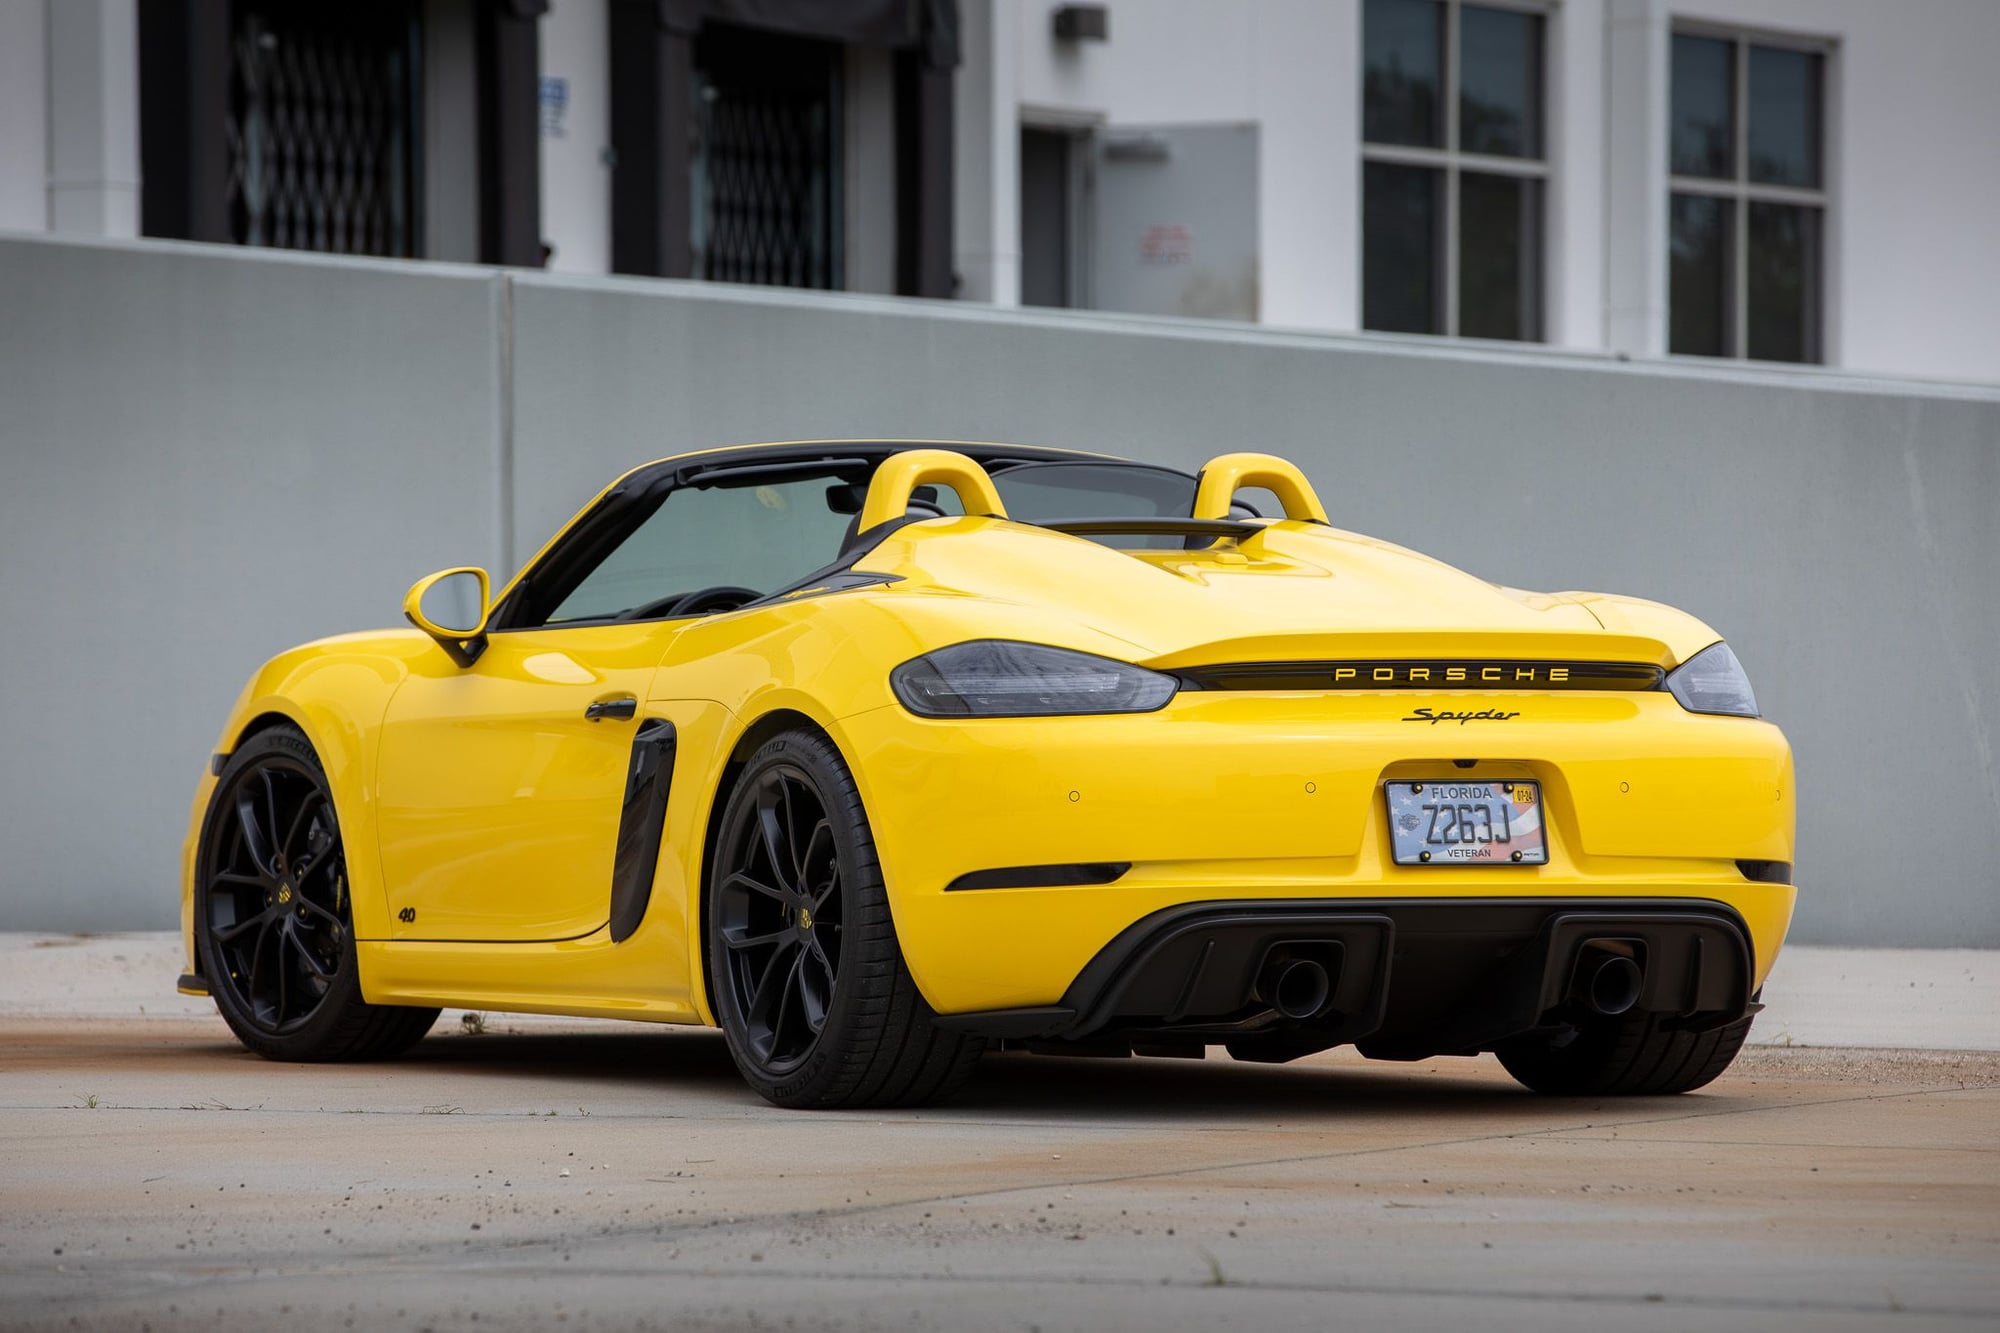 2021 Porsche 718 Spyder - 2021 718 Spyder - Used - VIN WP0CC2A84MS240814 - 7,857 Miles - 6 cyl - 2WD - Manual - Convertible - Yellow - Palm Coast, FL 32137, United States